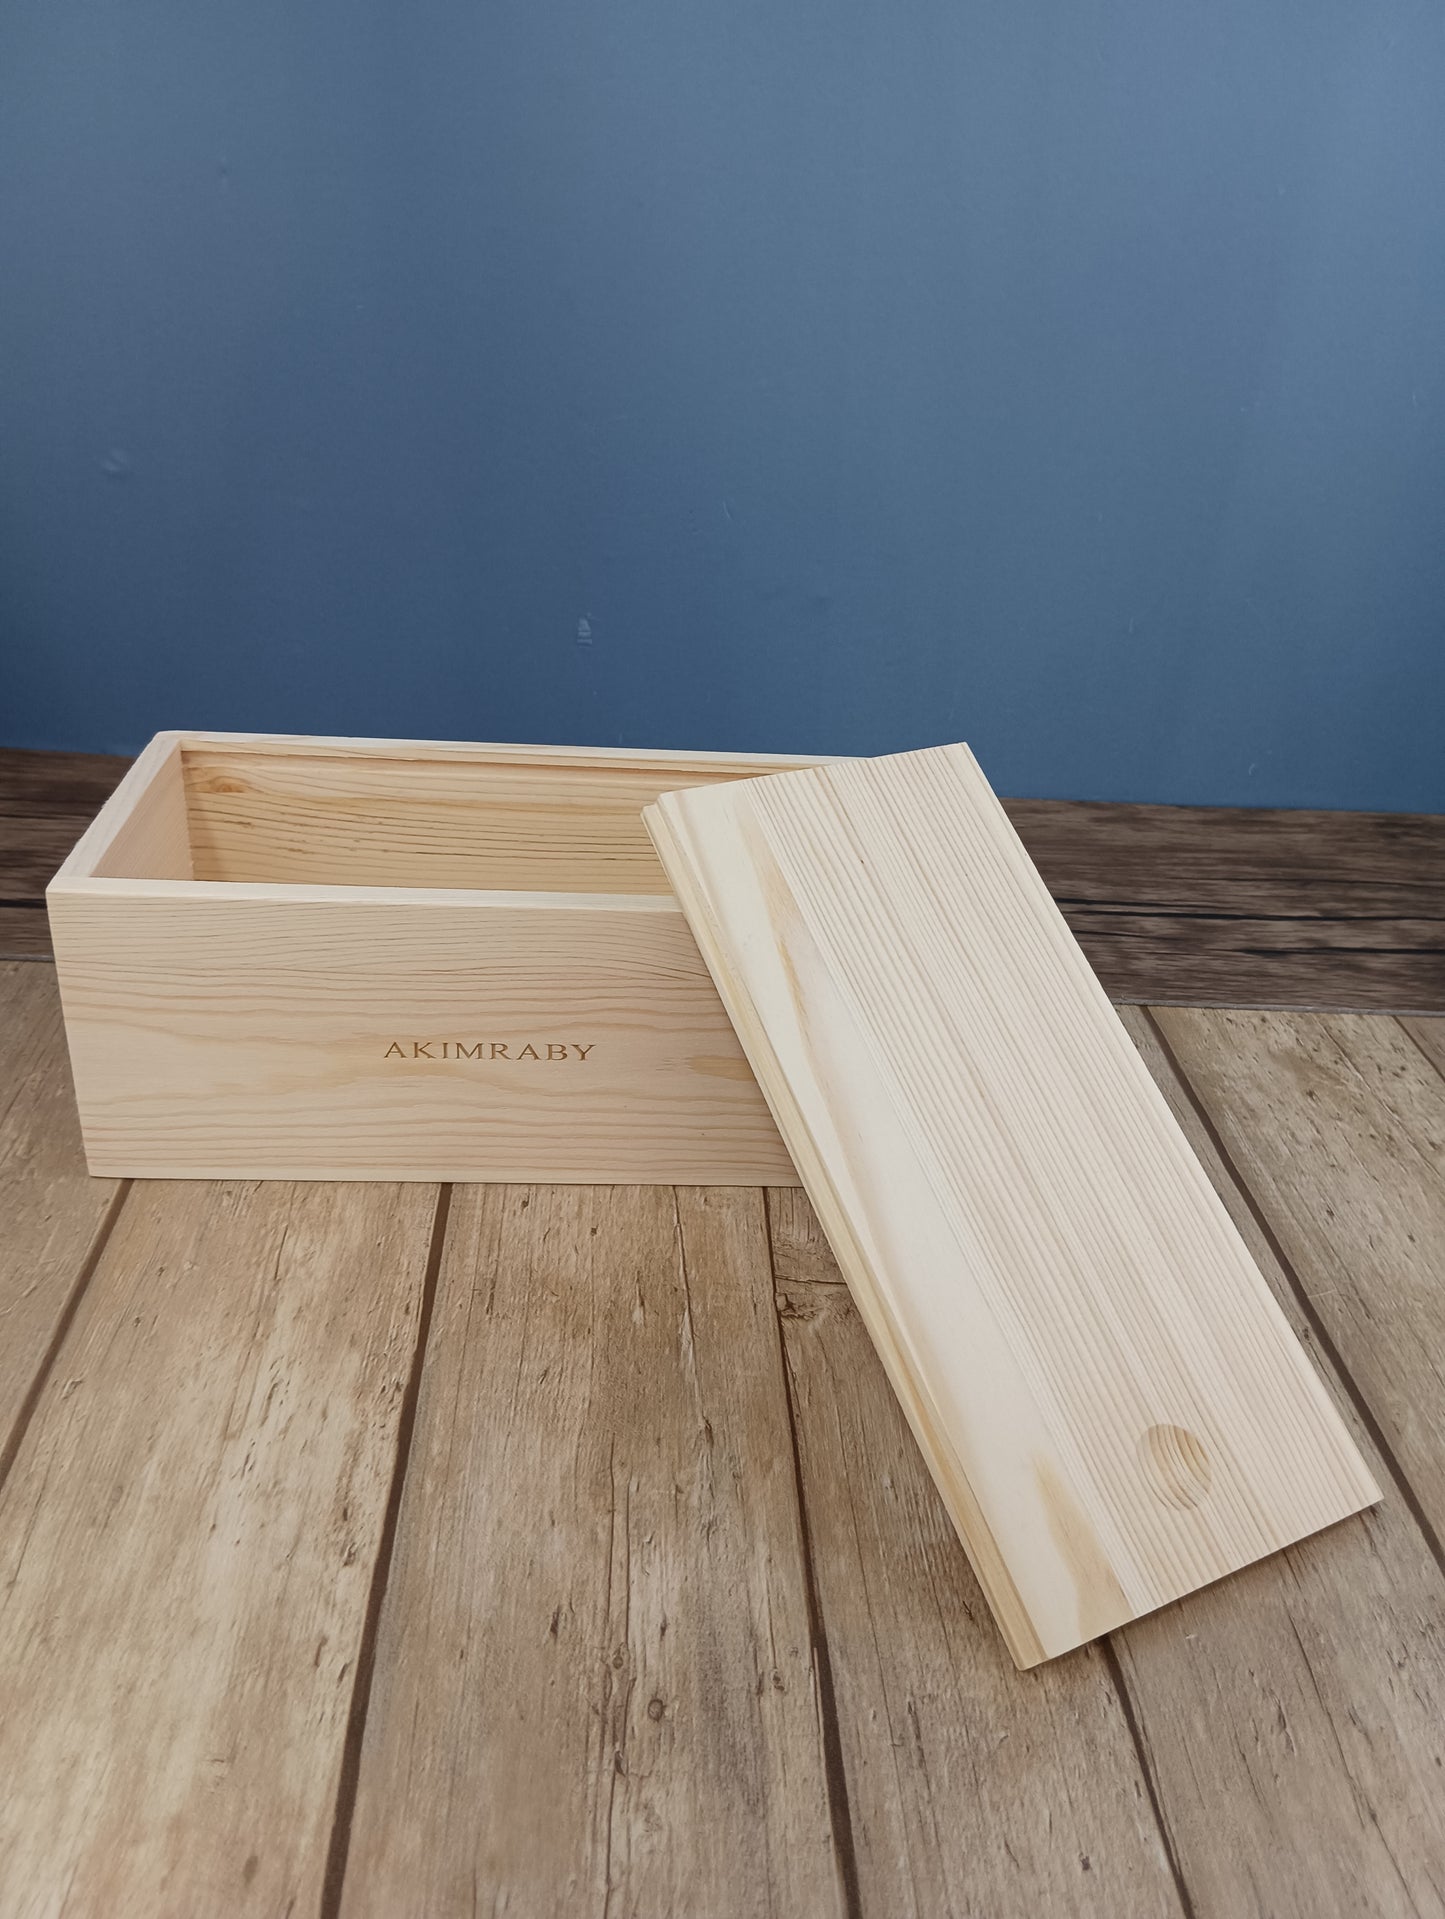 AKIMRABY Rectangular pull-out cover, solid wood box, wooden box, customized storage box, gift box, small wooden box